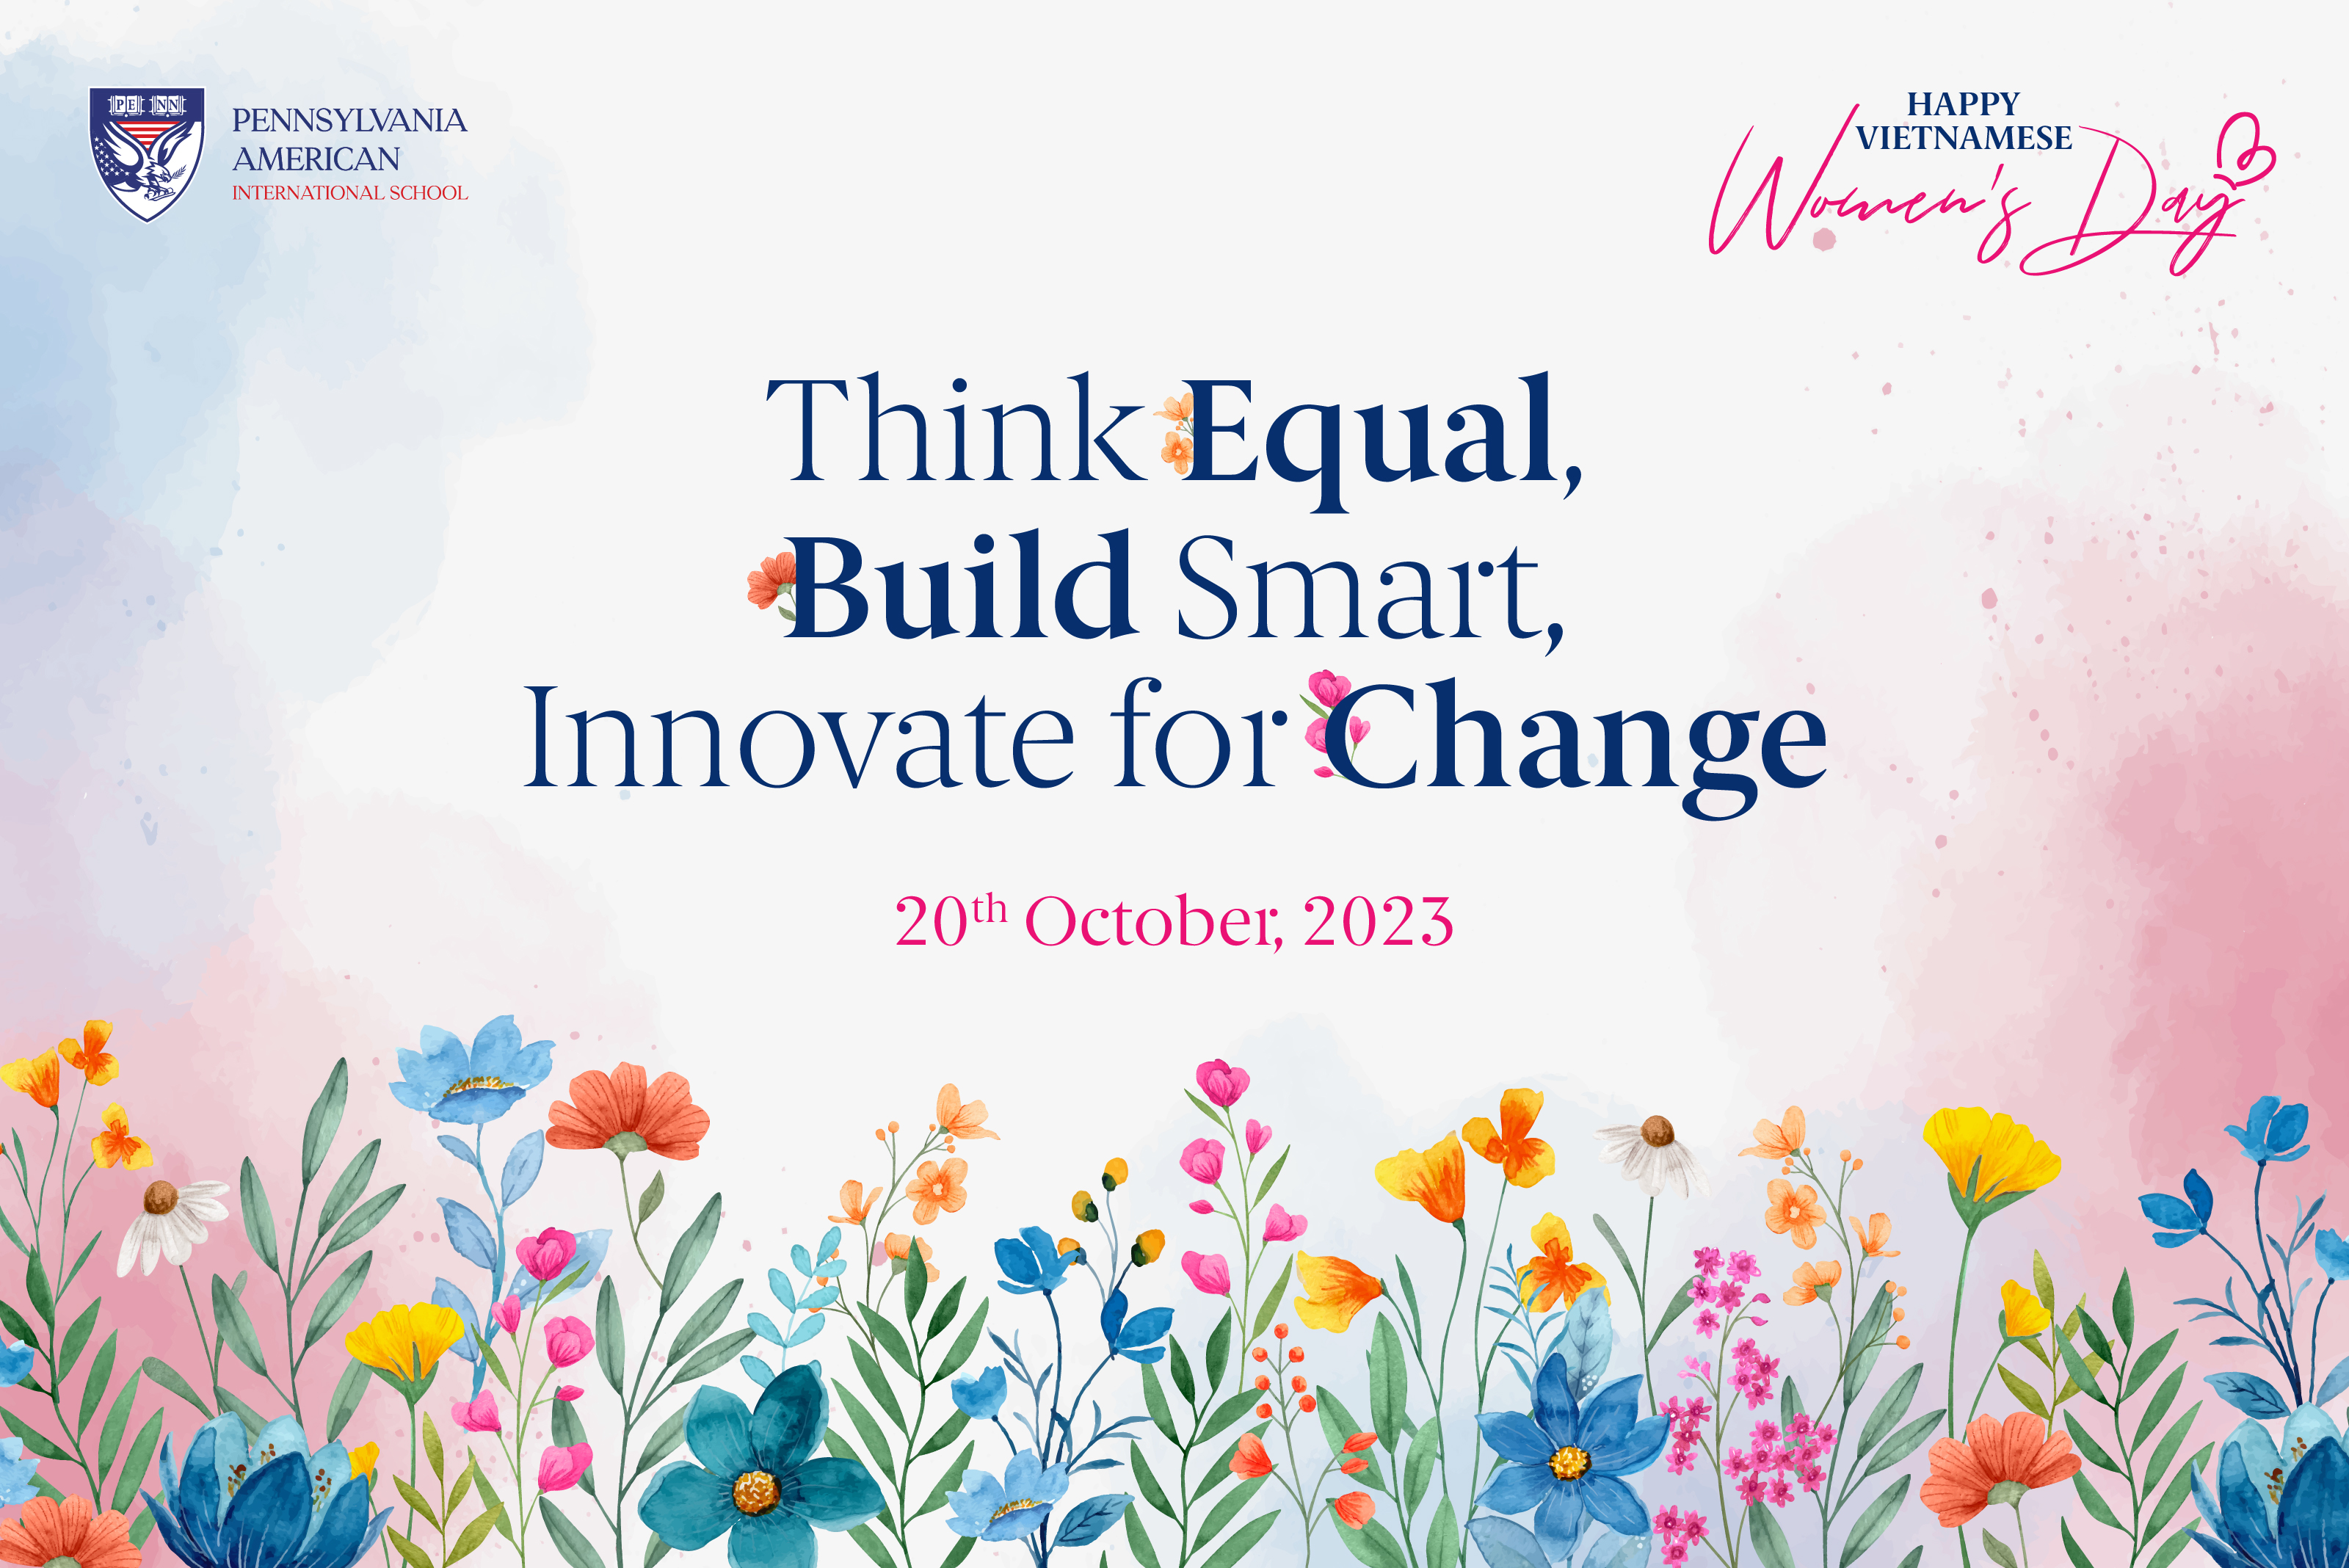 ngay-phu-nu-viet-nam-think-equal-build-smart-innovate-for-change